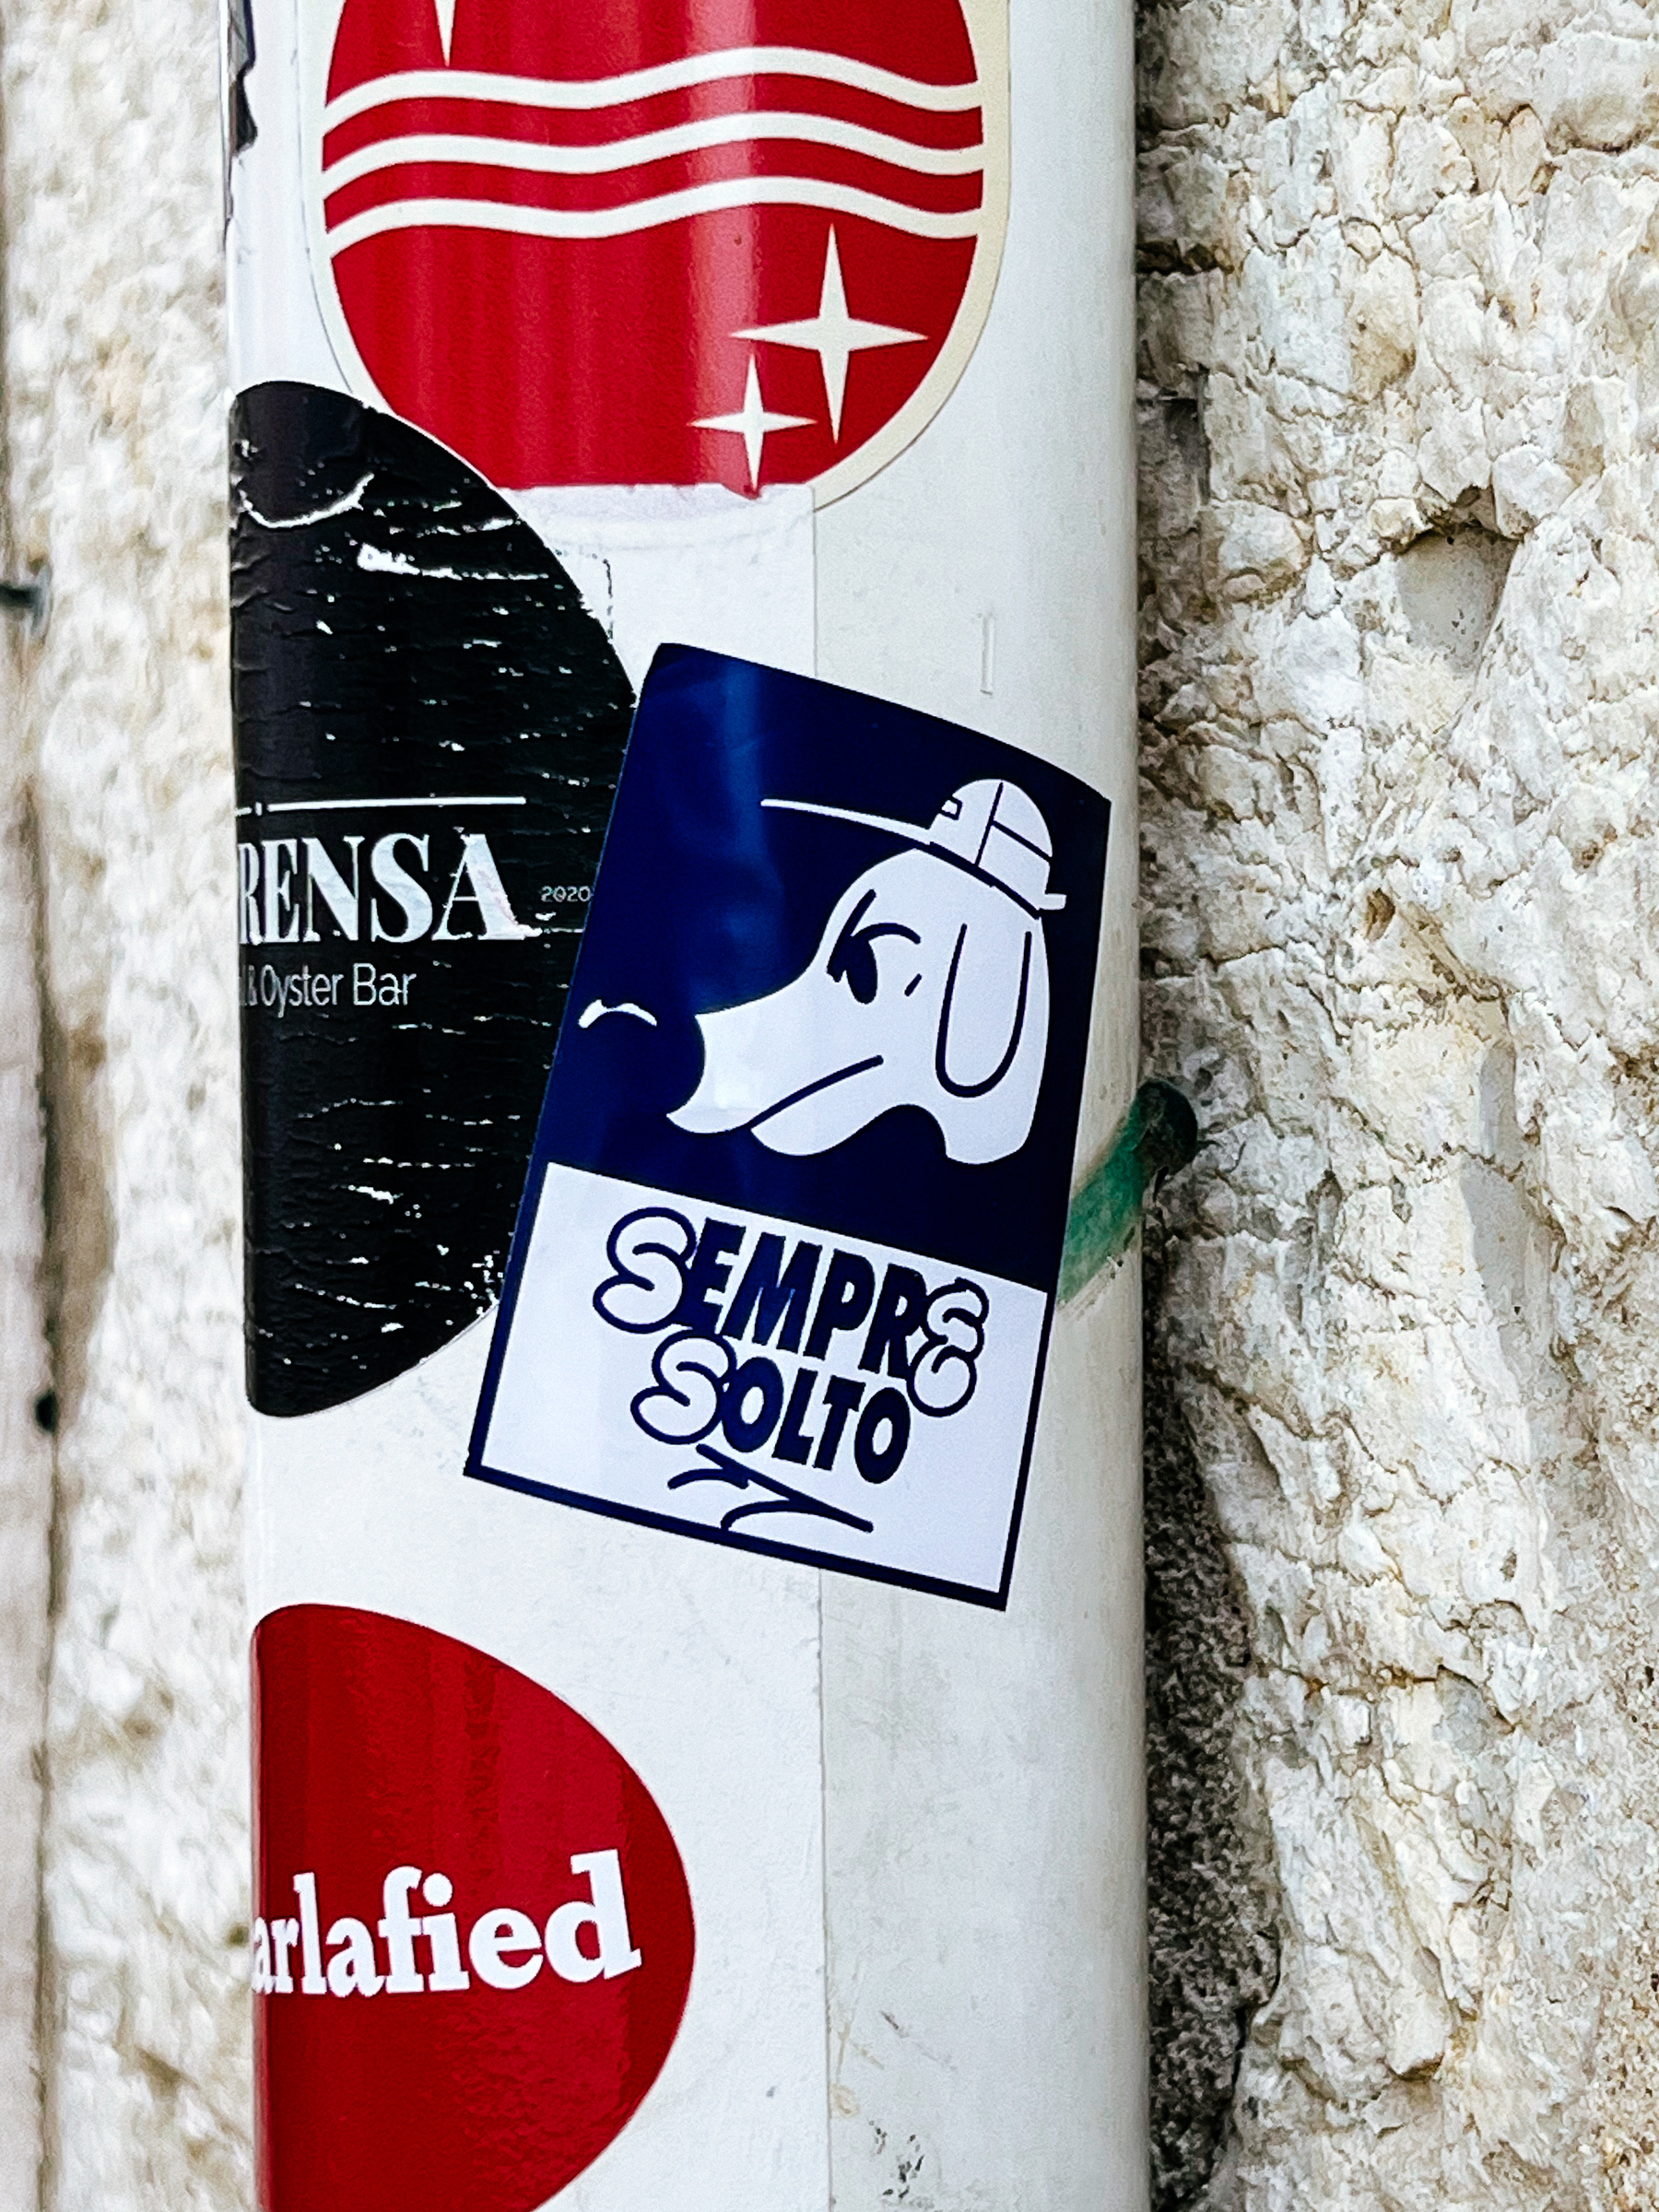 “Sempre Solto”, a dog with a hat. Not looking happy. A sticker. 